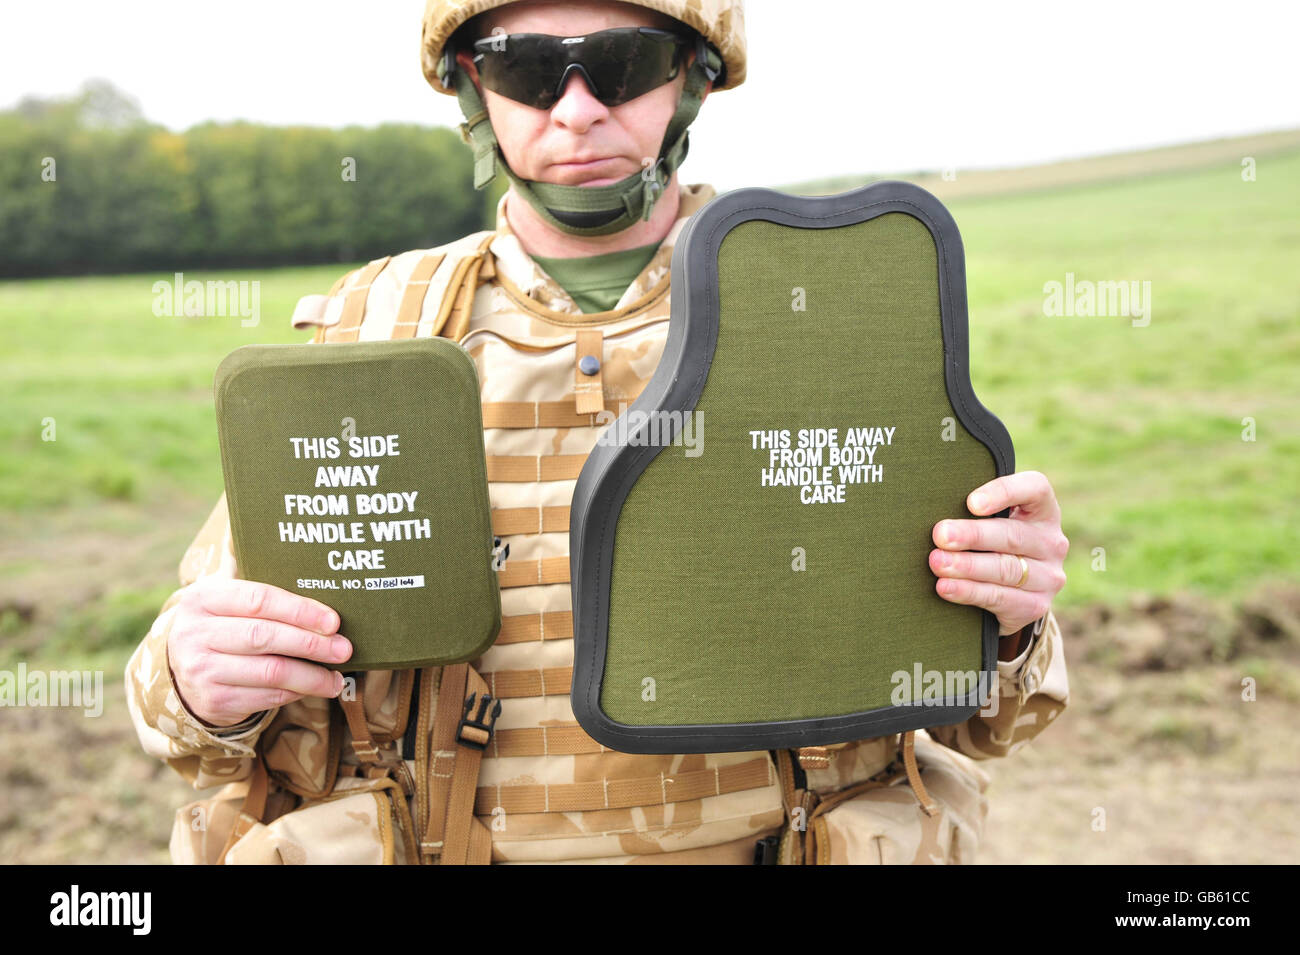 A comparison of British Army body armour. On the left is the small